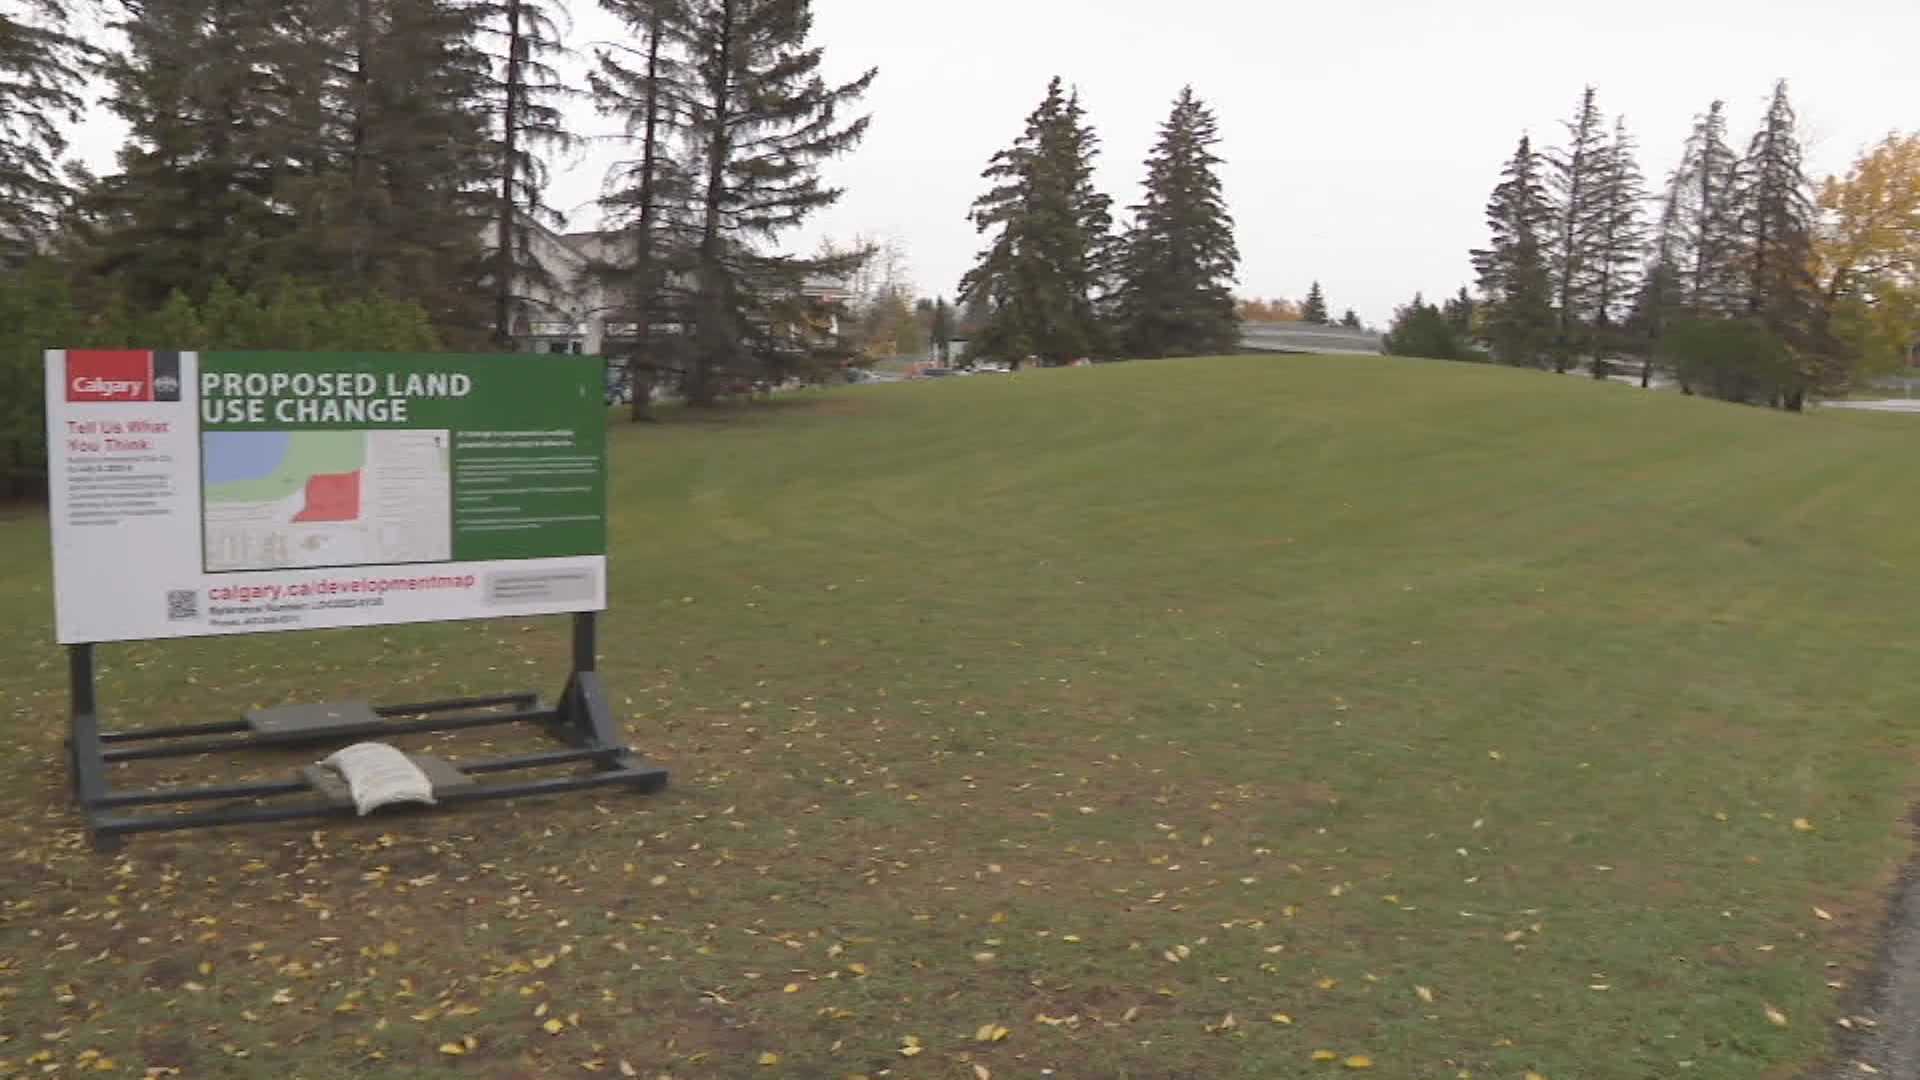 Calgary wants to dispose of city-owned park space near Glenmore Landing